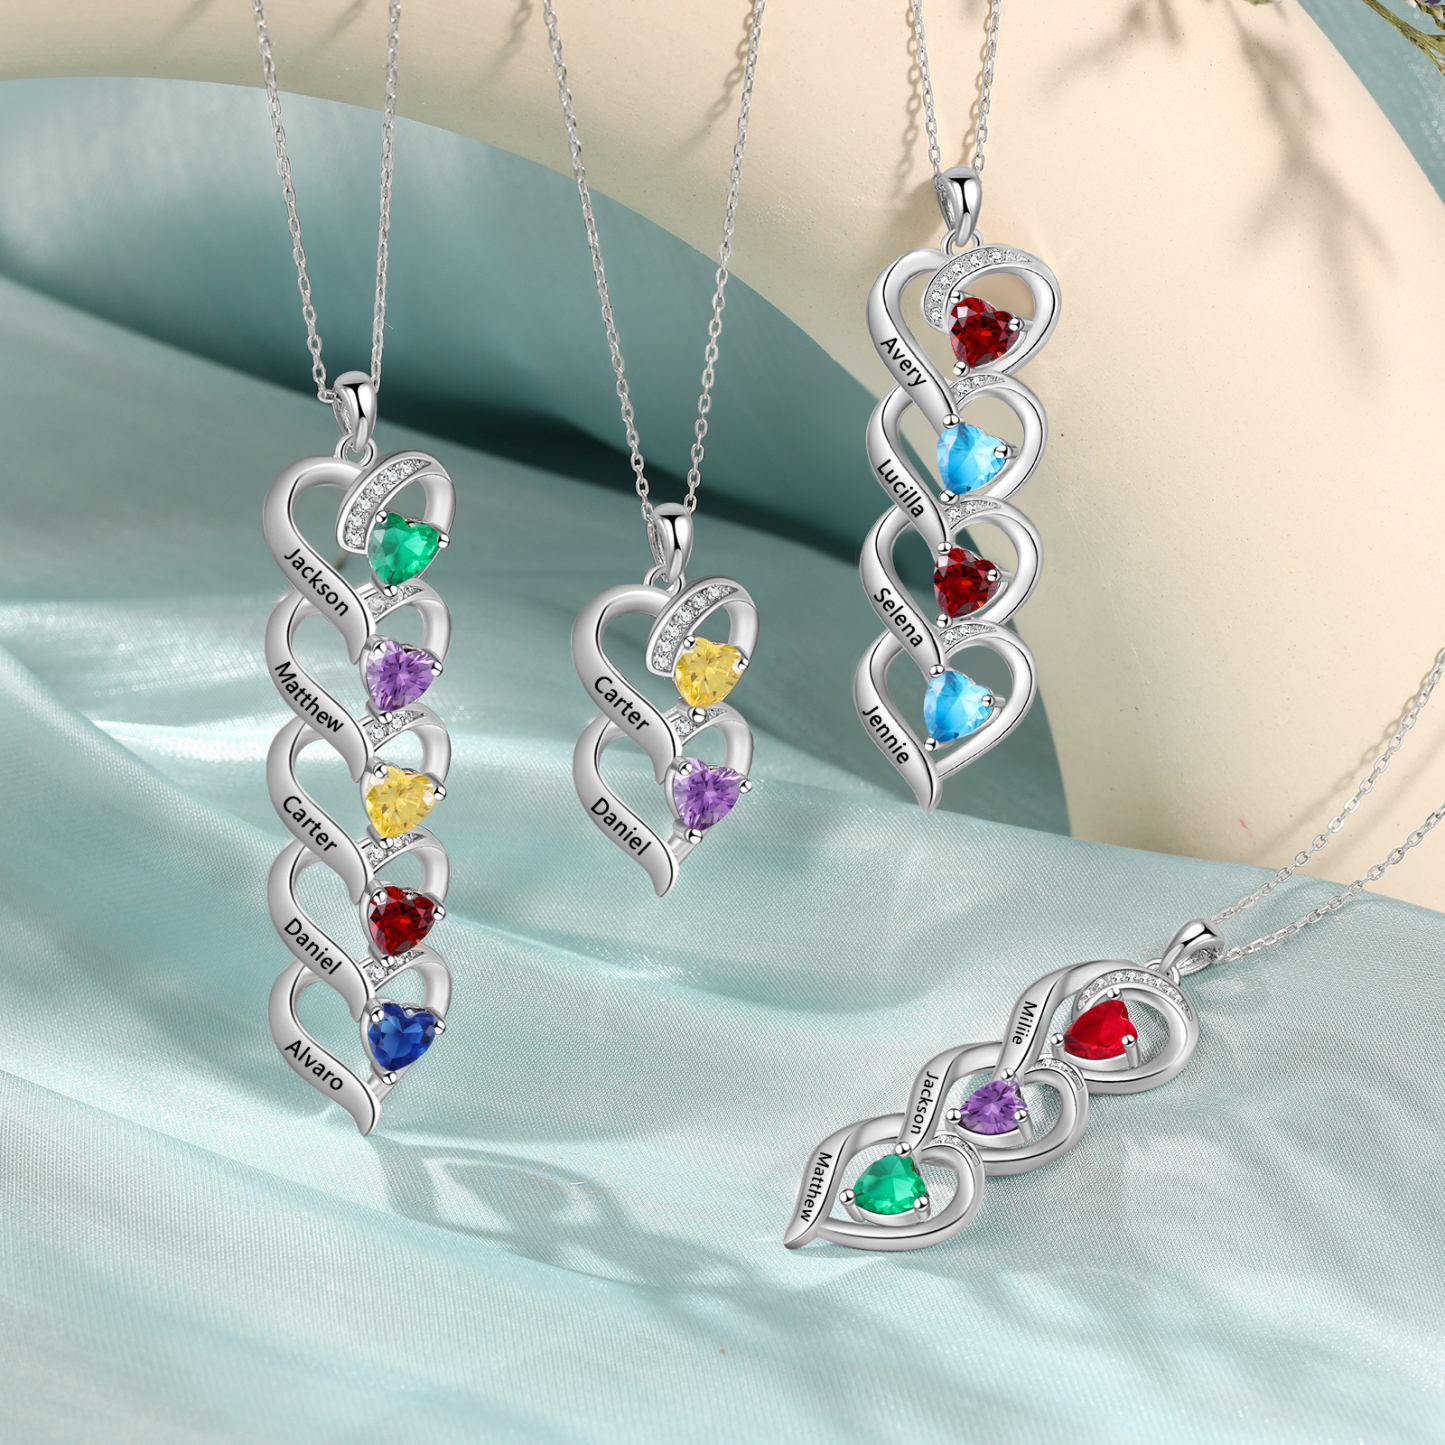 3 Name - Personalized Love Necklace with Customized Name and Birthstone, A Perfect and Exquisite Gift for Her